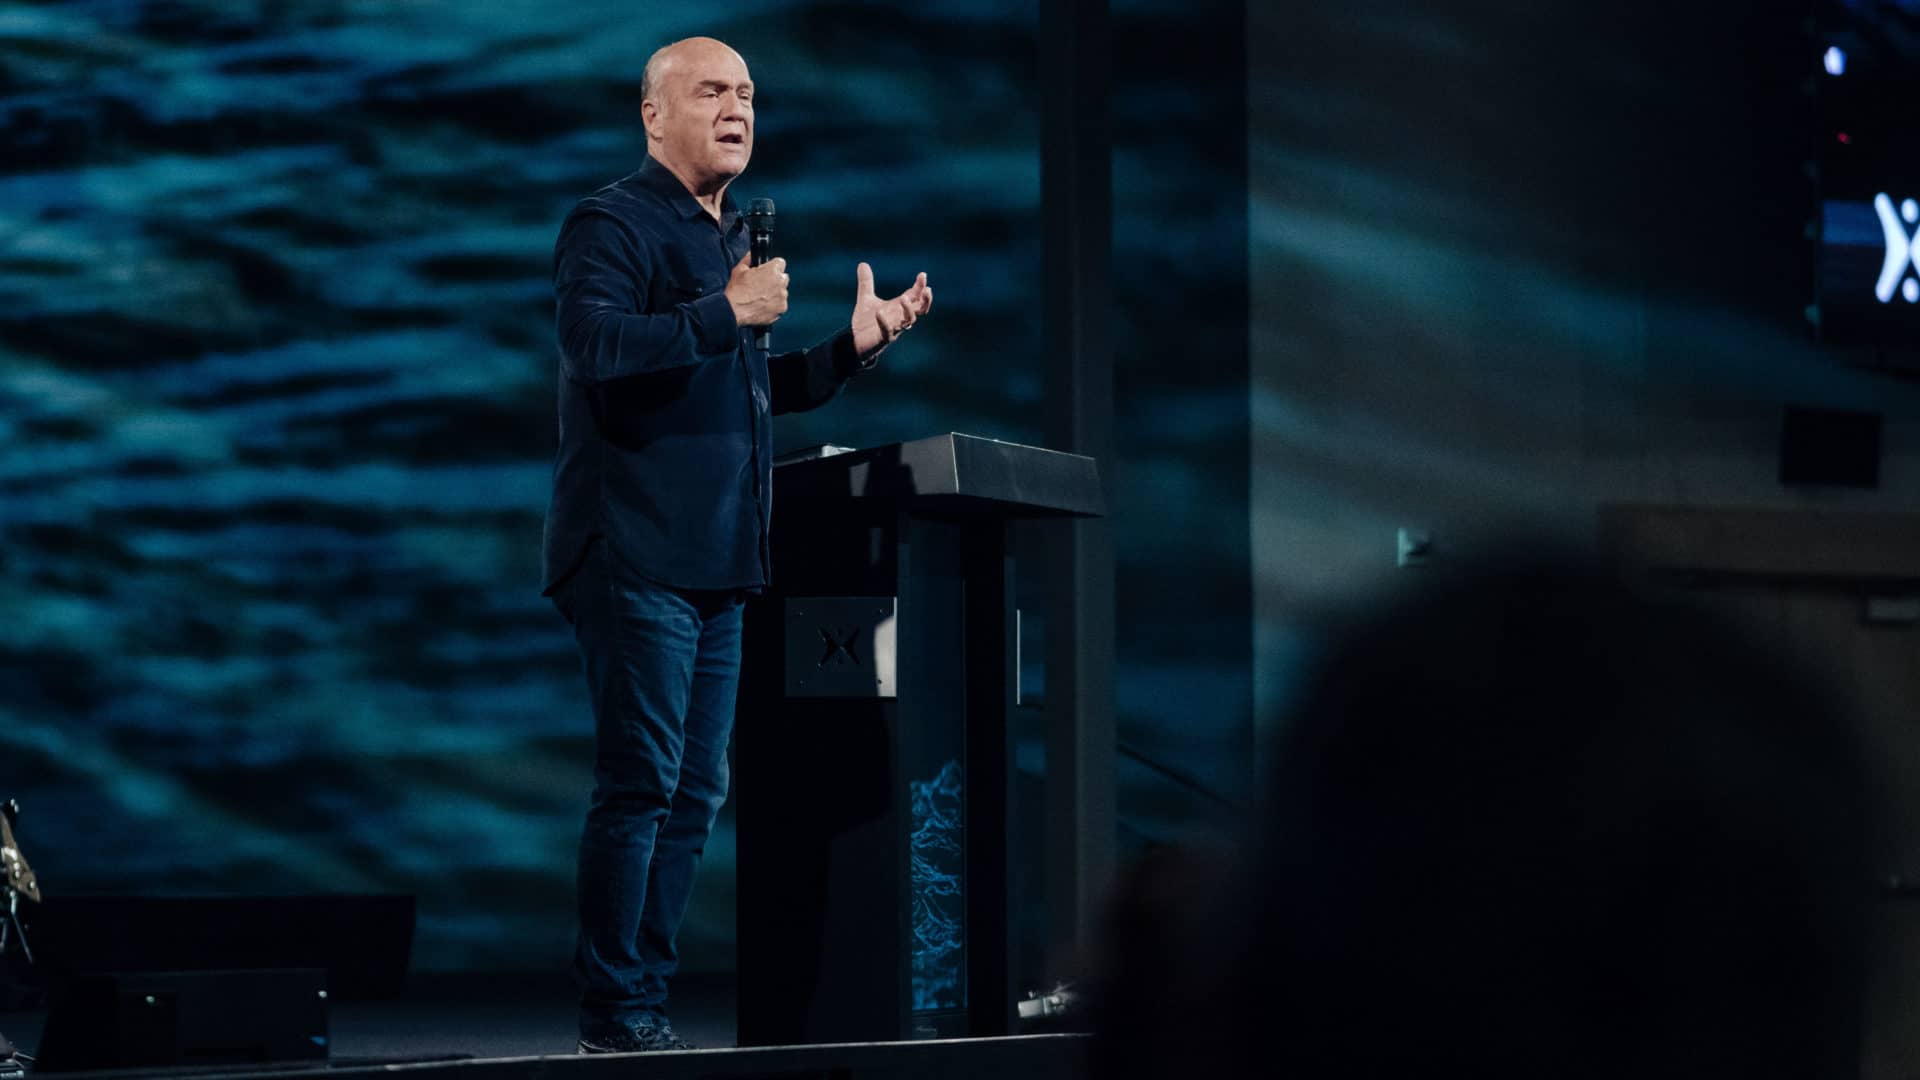 Pastor Greg Laurie shares a message from 1 Peter 5 and Philippians 4 titled “God’s Answer to Fear, Worry, and Anxiety, Part 2” in our Sunday Morning" series at Harvest Christian Fellowship.